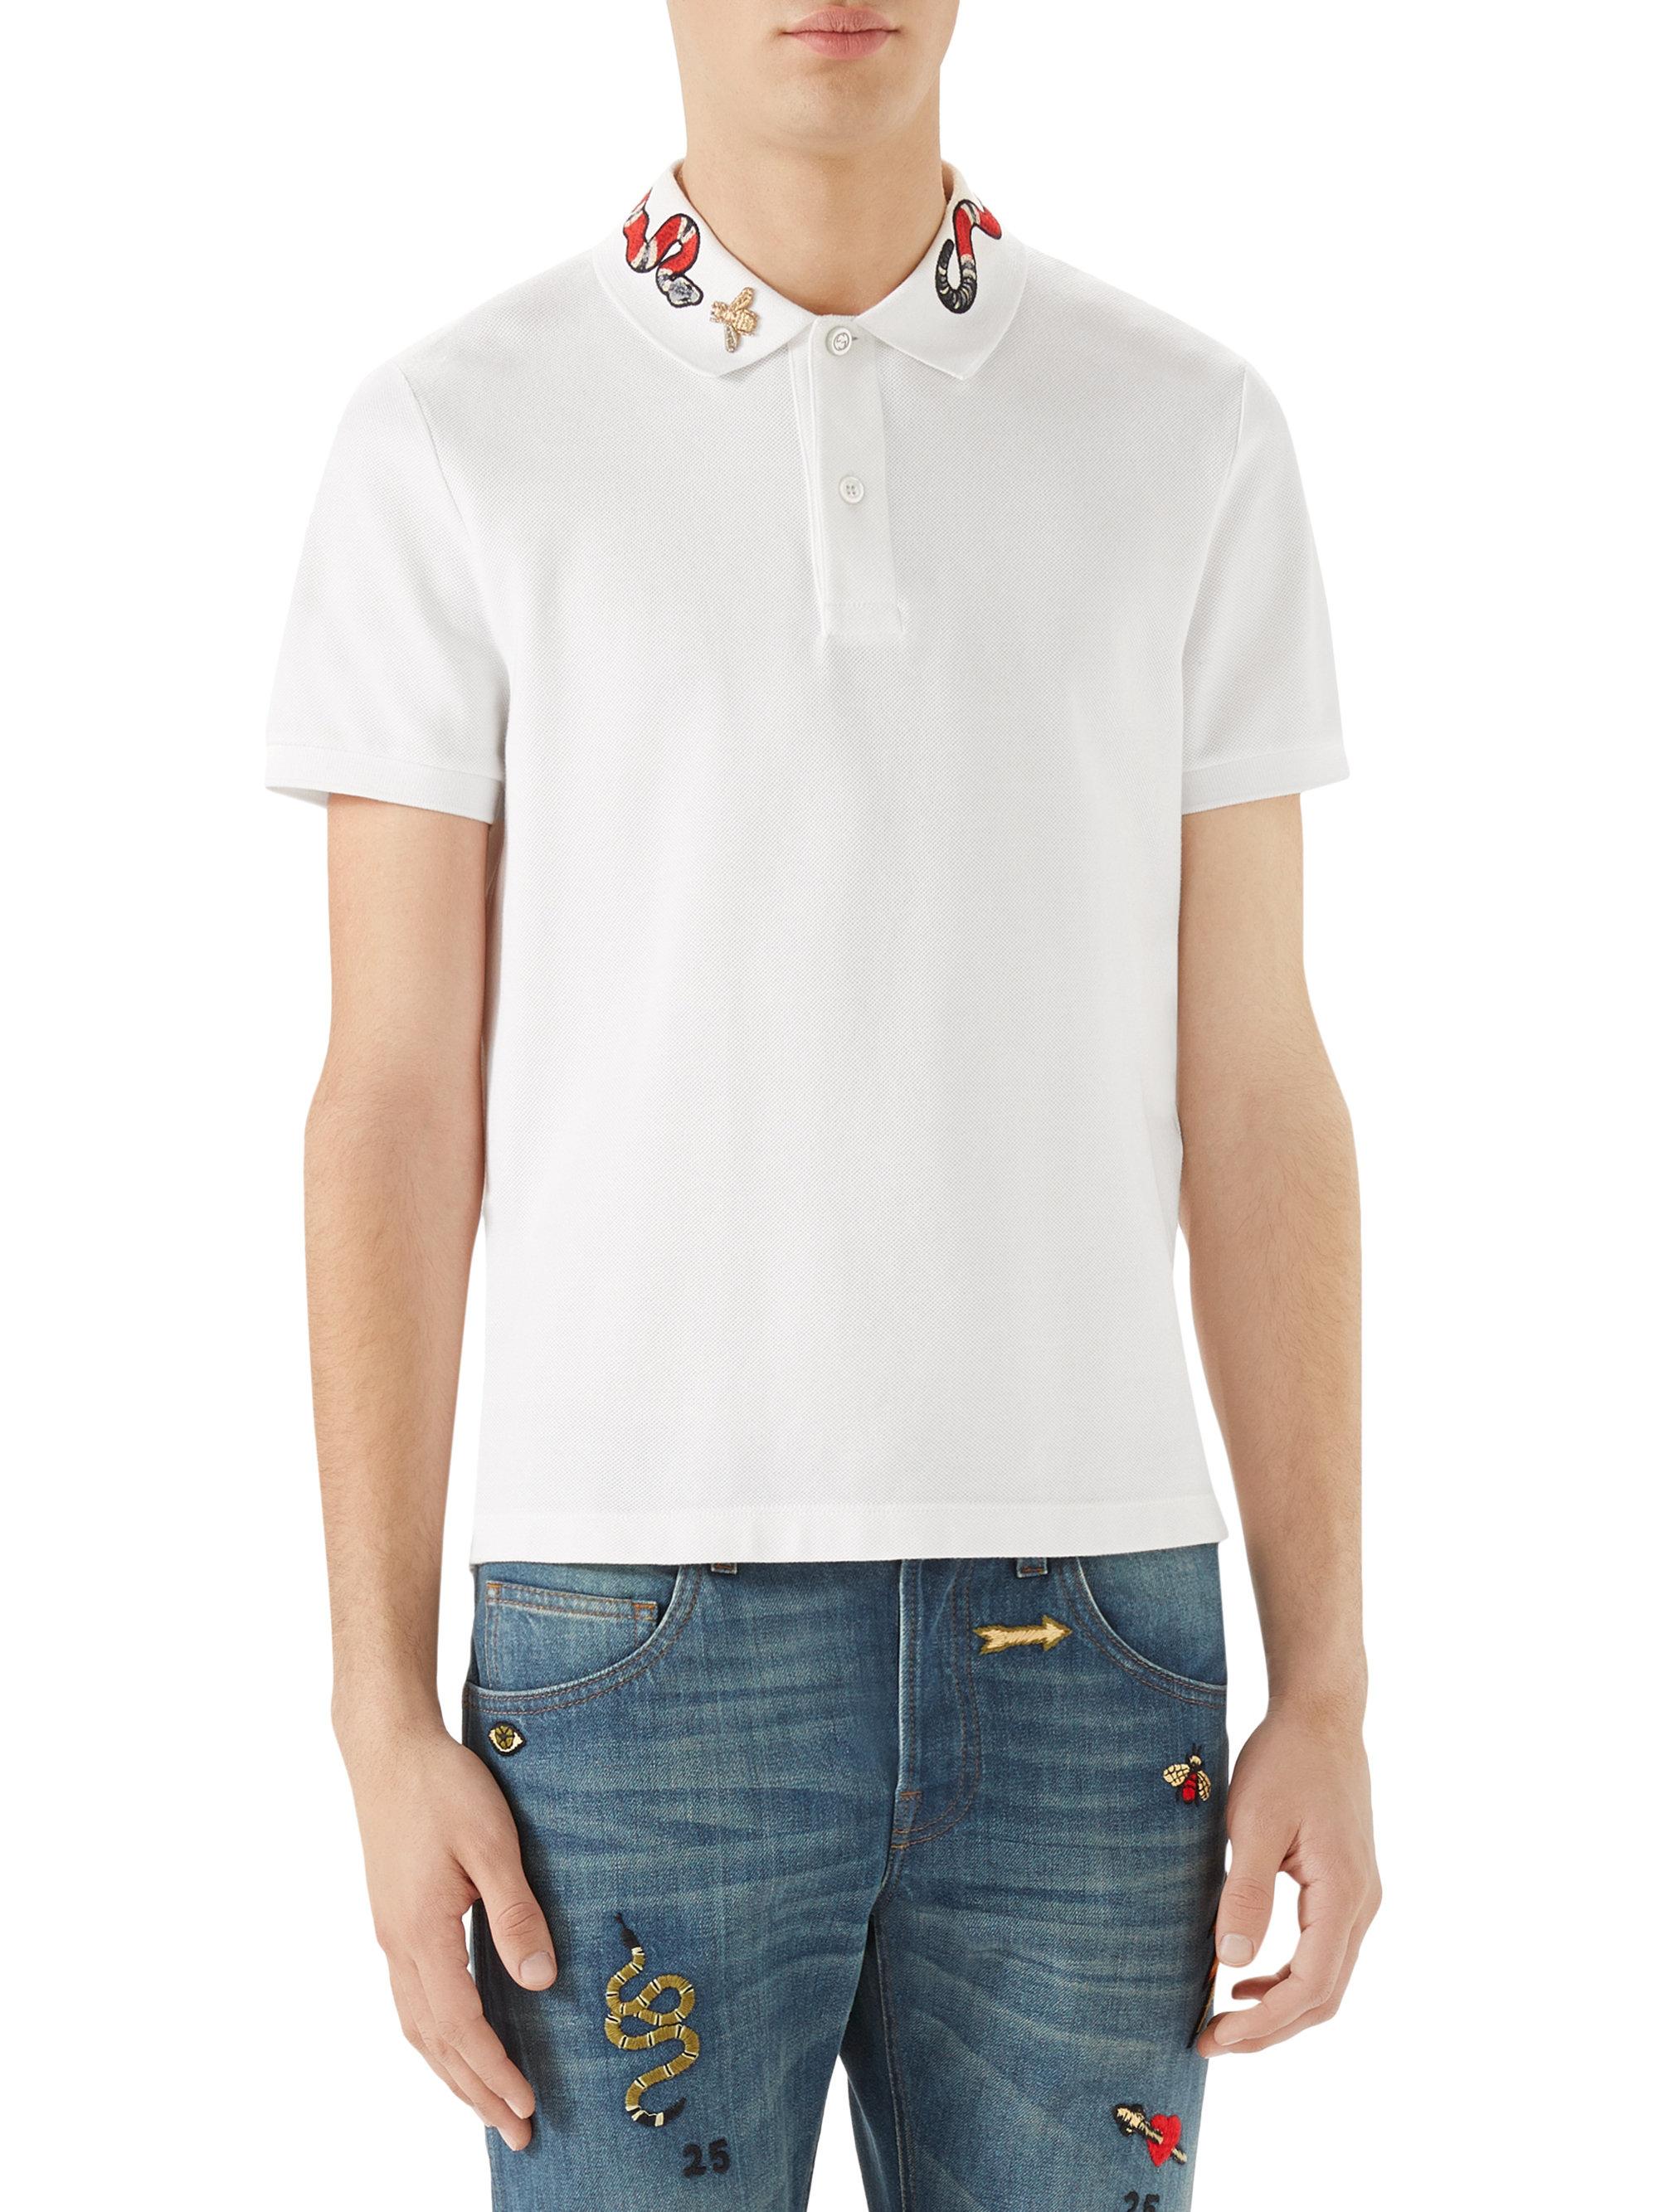 Gucci Cotton Kingsnake Embroidered Polo Shirt in White for Men - Lyst